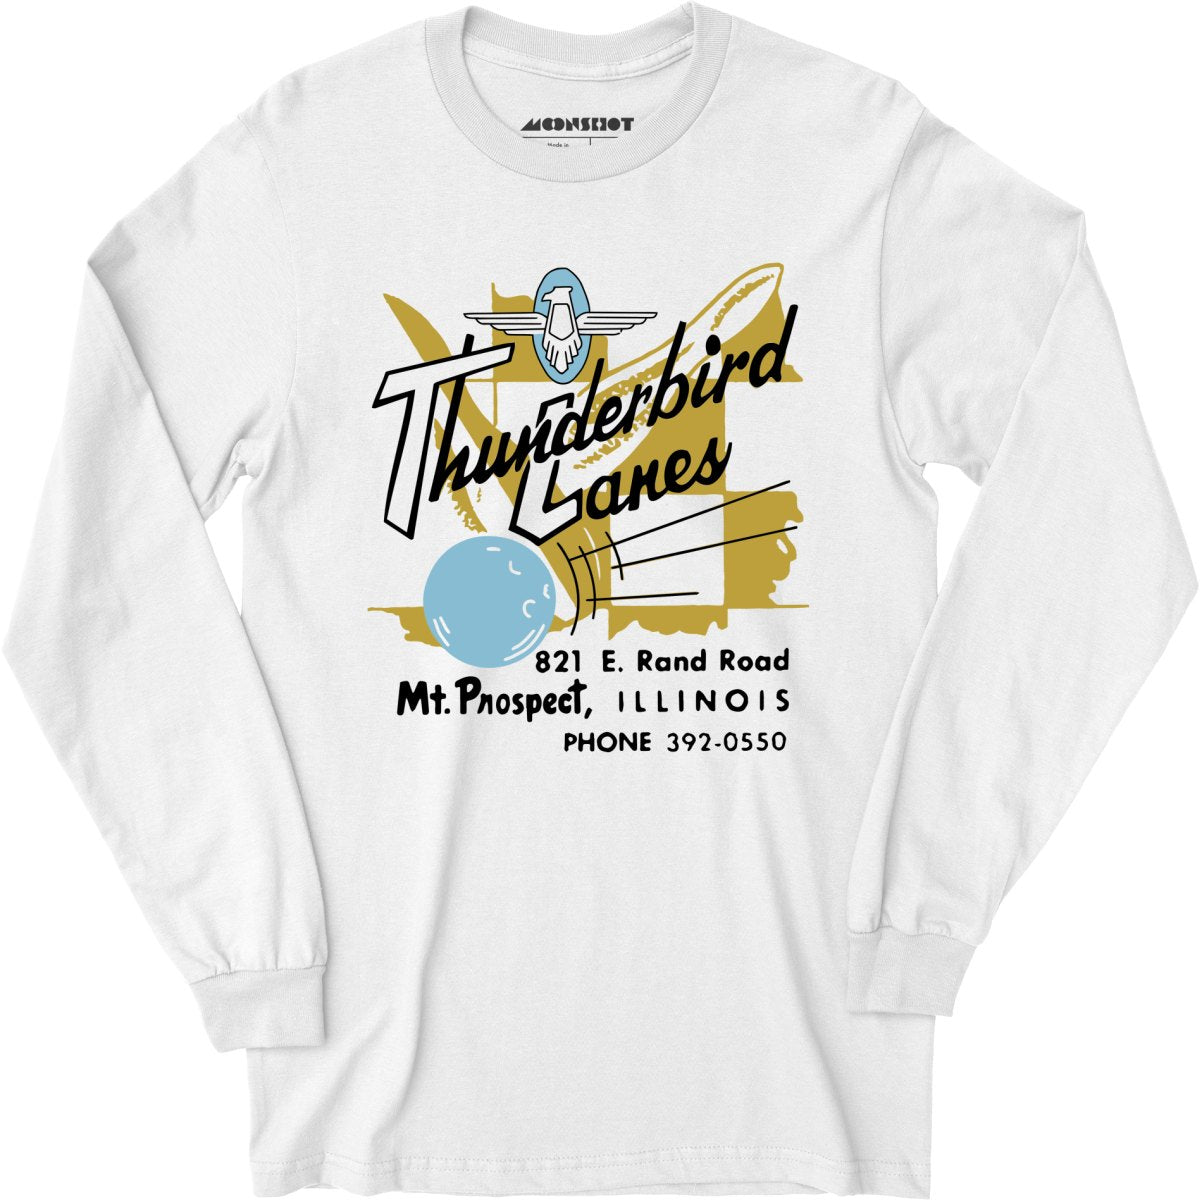 Thunderbird Lanes - Mt. Prospect, IL - Vintage Bowling Alley - Long Sleeve T-Shirt